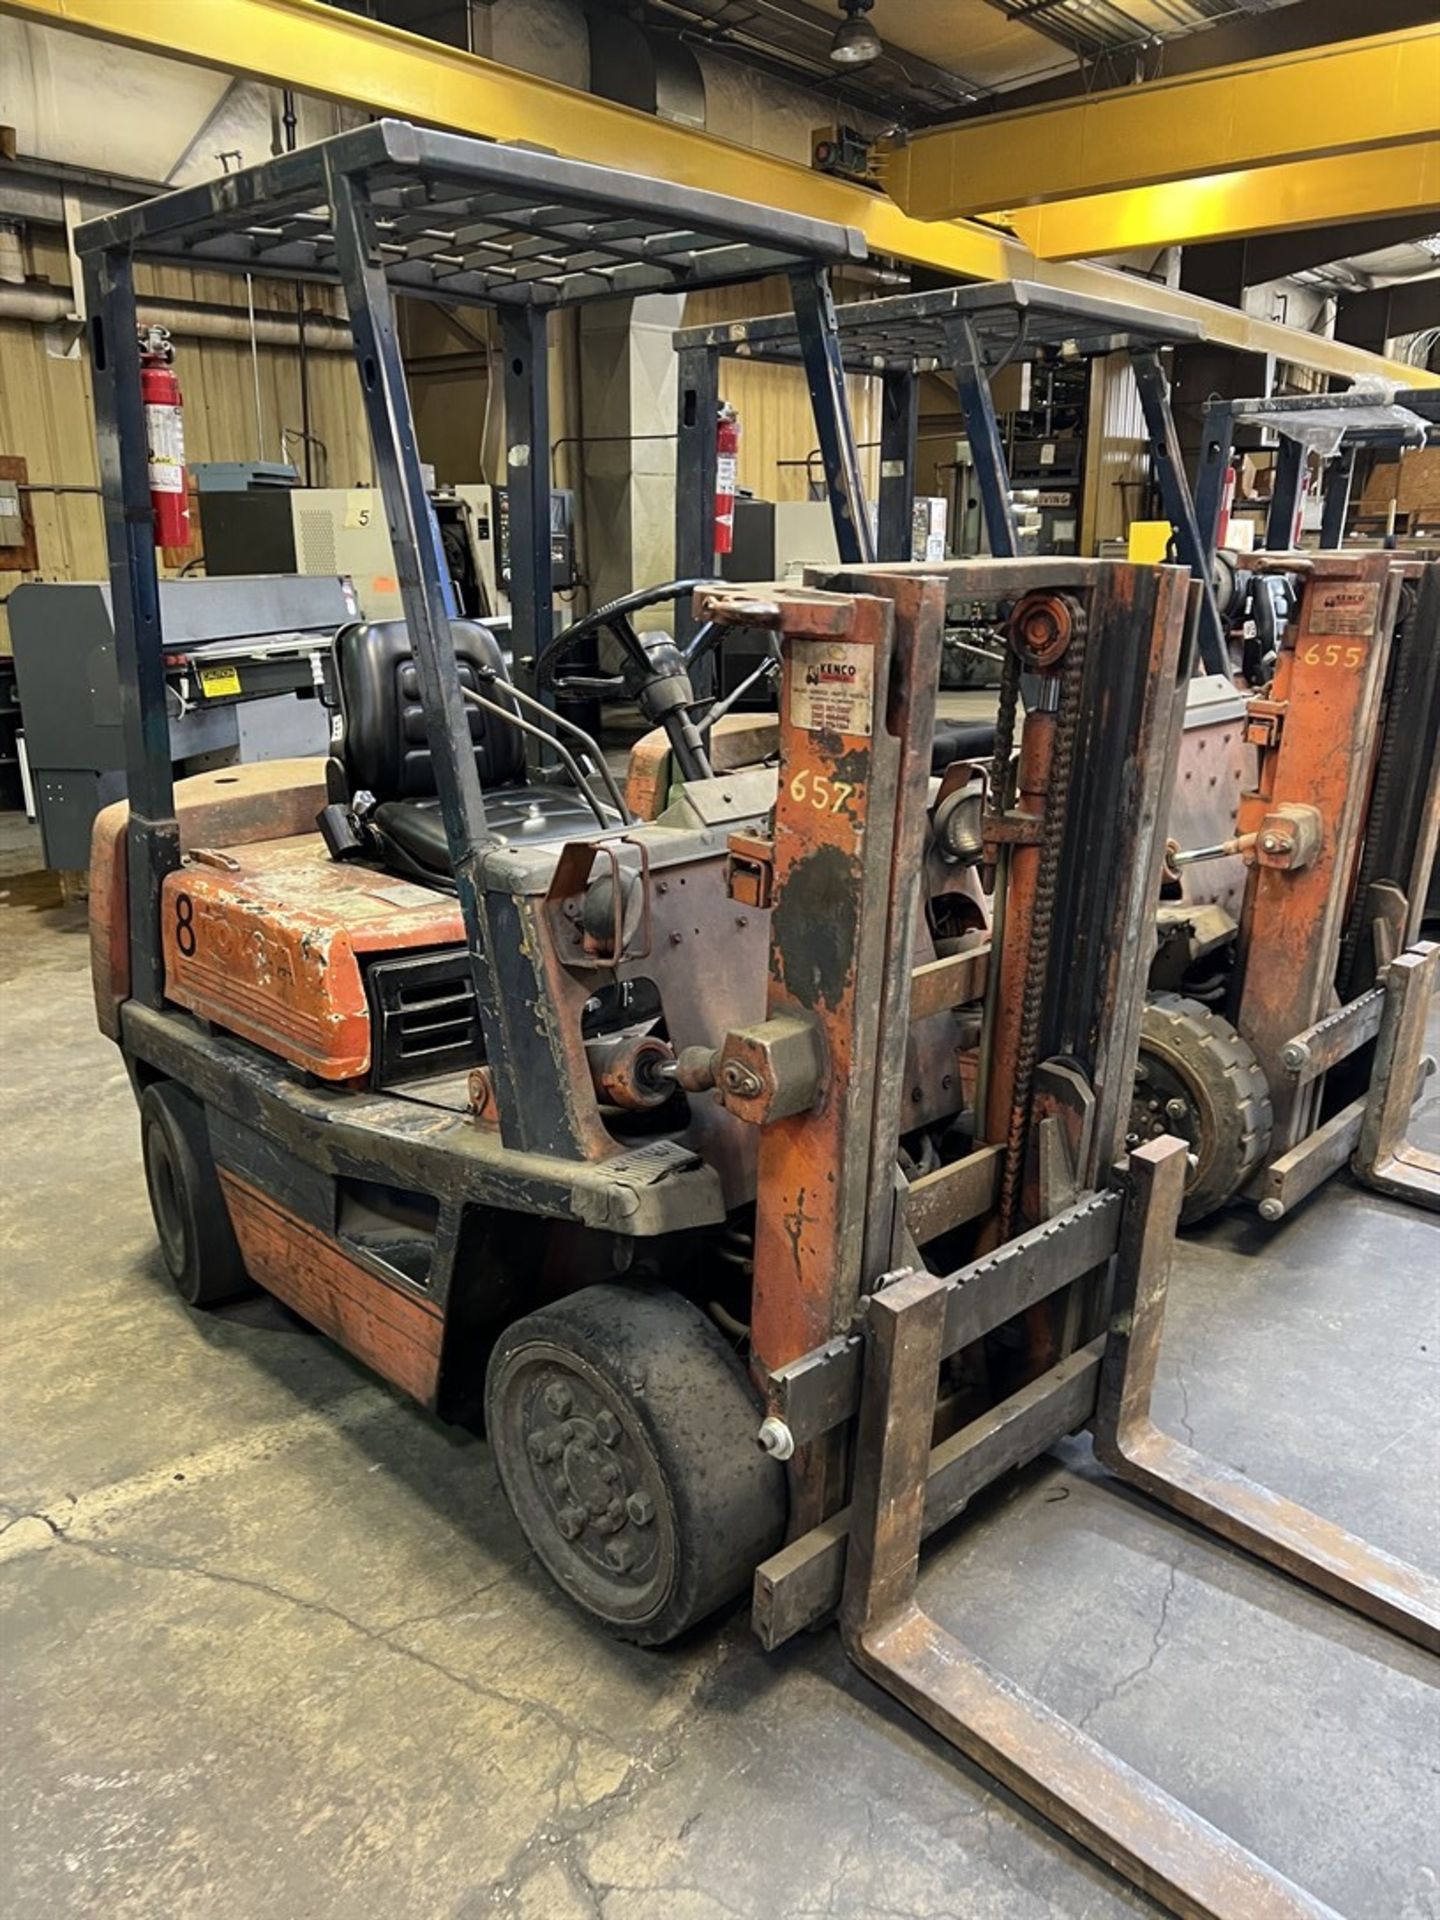 TOYOTA 02-2FDC20 Short Mast LP Forklift, s/n 2FDC25-12572, 4000 Lb Capacity, 2-Stage Mast, OH - Image 3 of 9